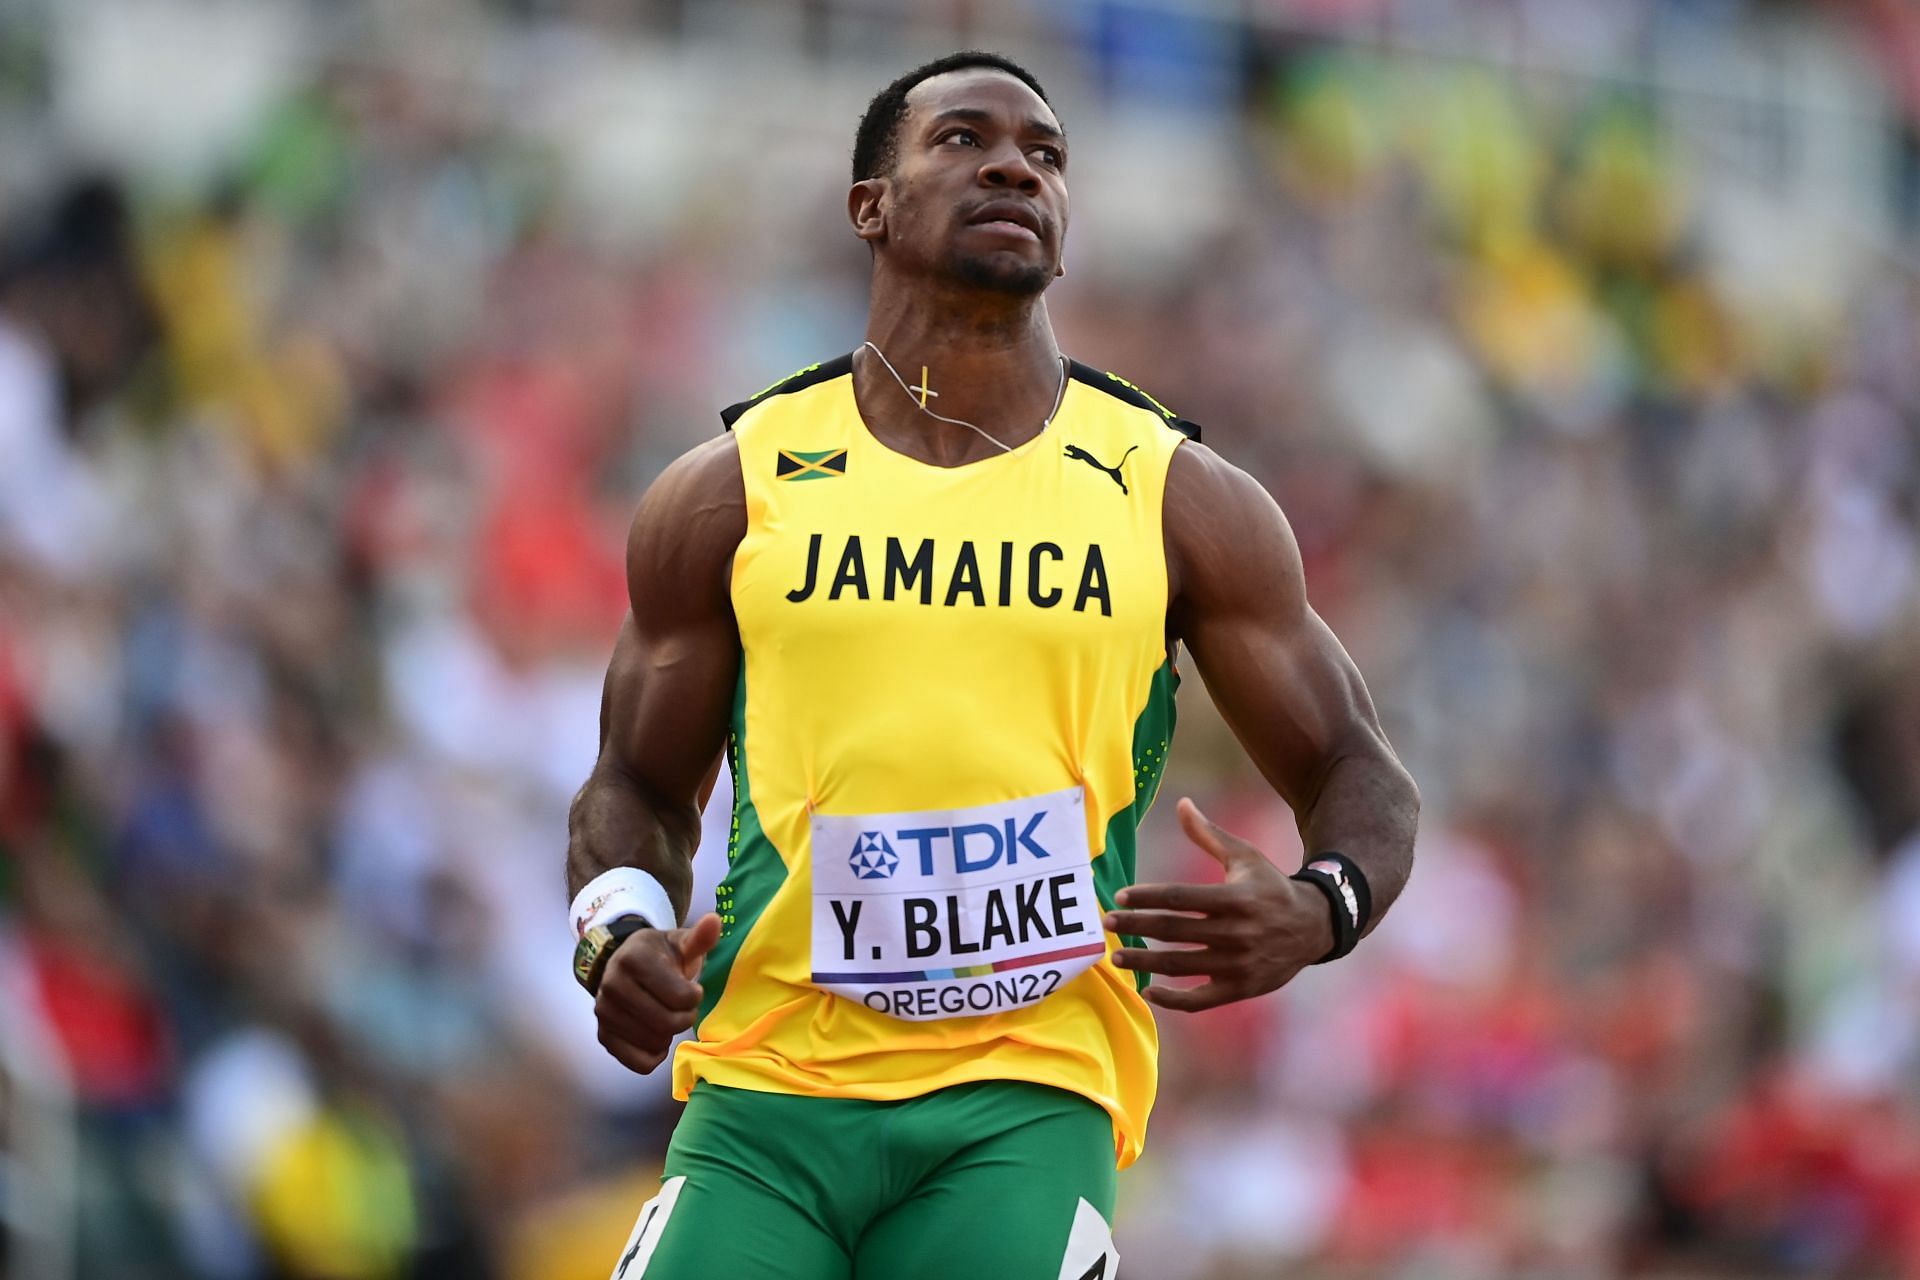 Yohan Blake of Team Jamaica looks on after competing in the Men&rsquo;s 100m Semi-Final on day two of the World Athletics Championships Oregon22 at Hayward Field on July 16, 2022 in Eugene, Oregon. (Photo by Hannah Peters/Getty Images for World Athletics)